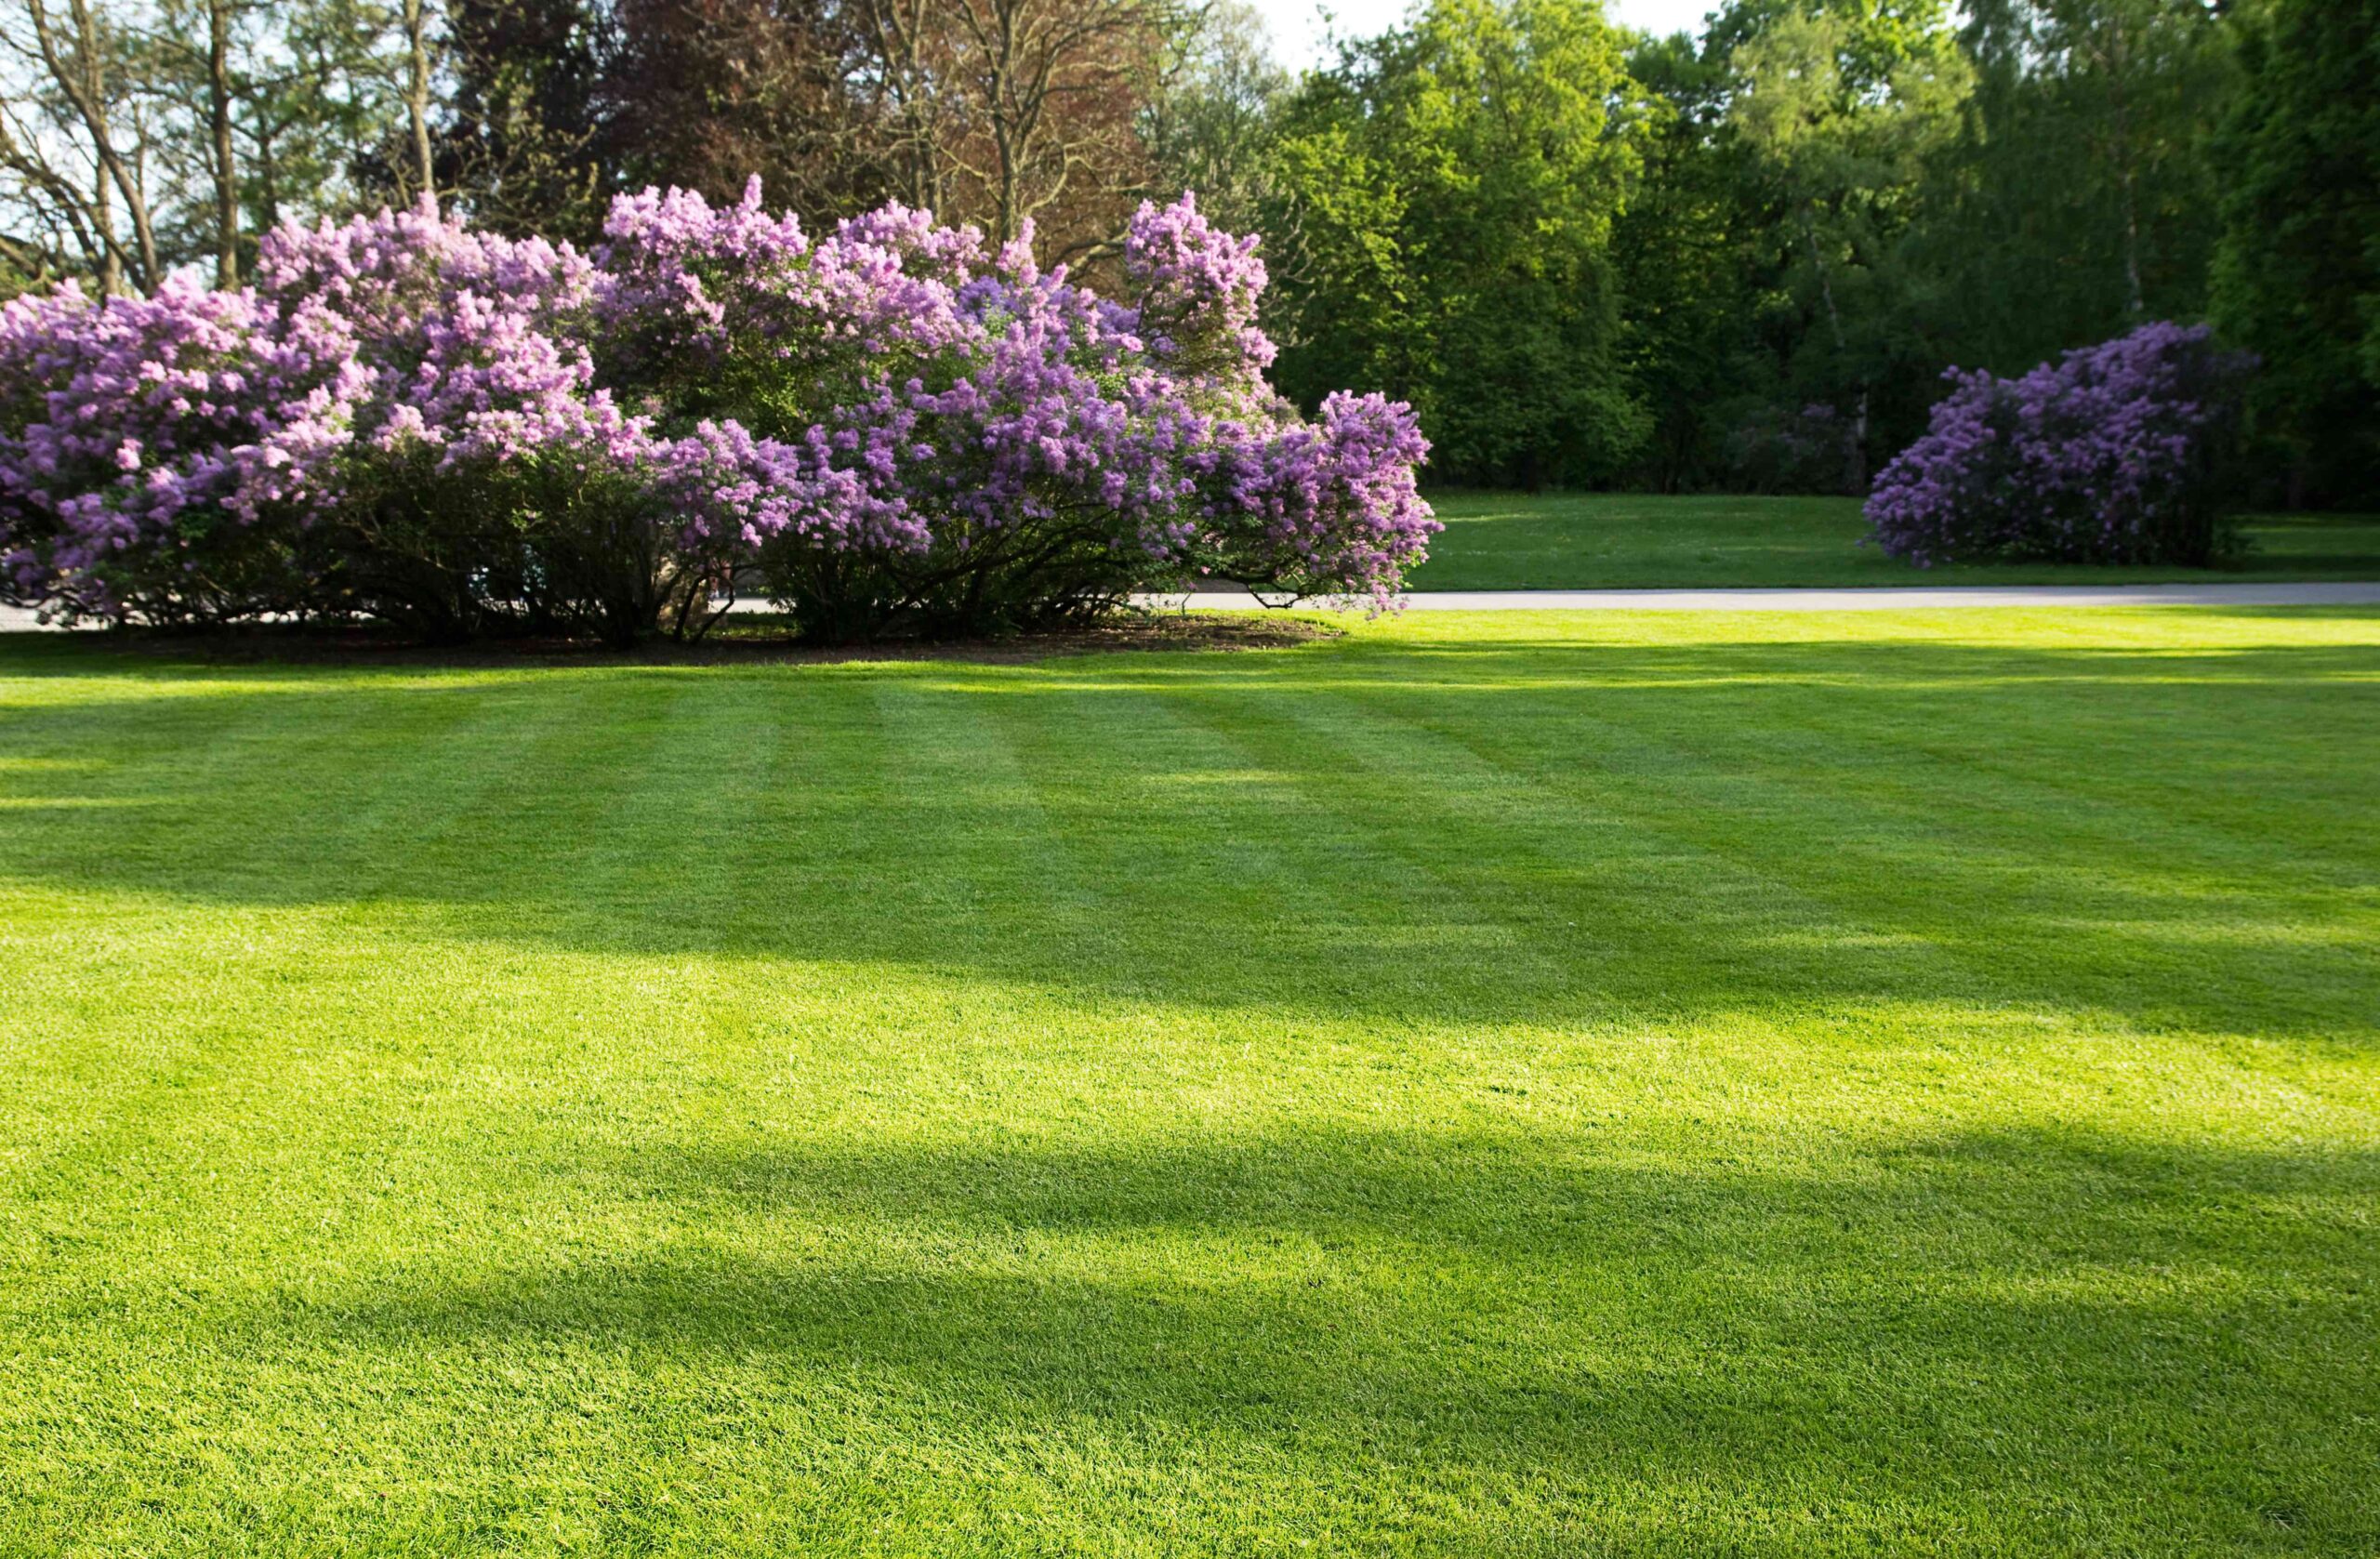 Waxhaw green lawn in the spring